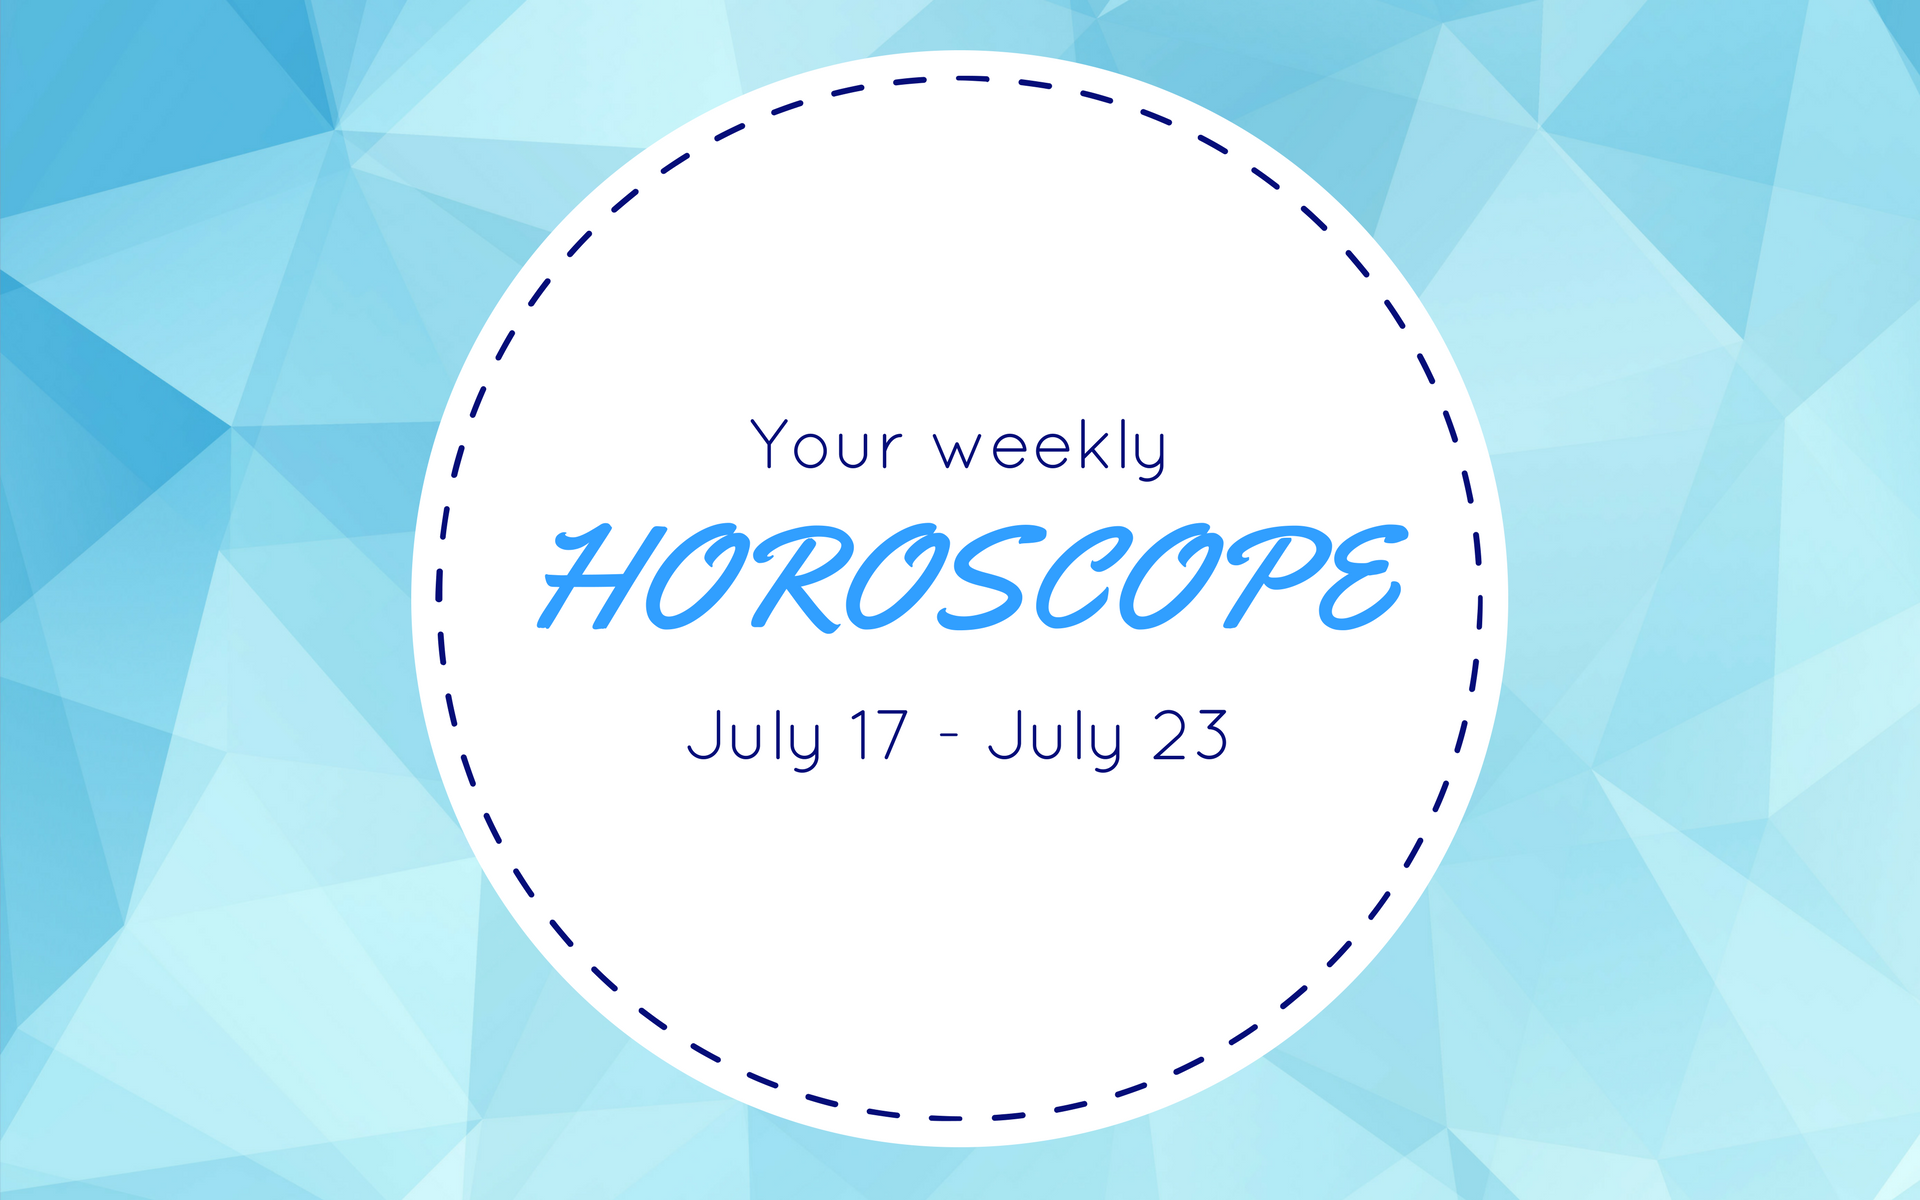 Your Weekly Horoscope: July 17 - July 23